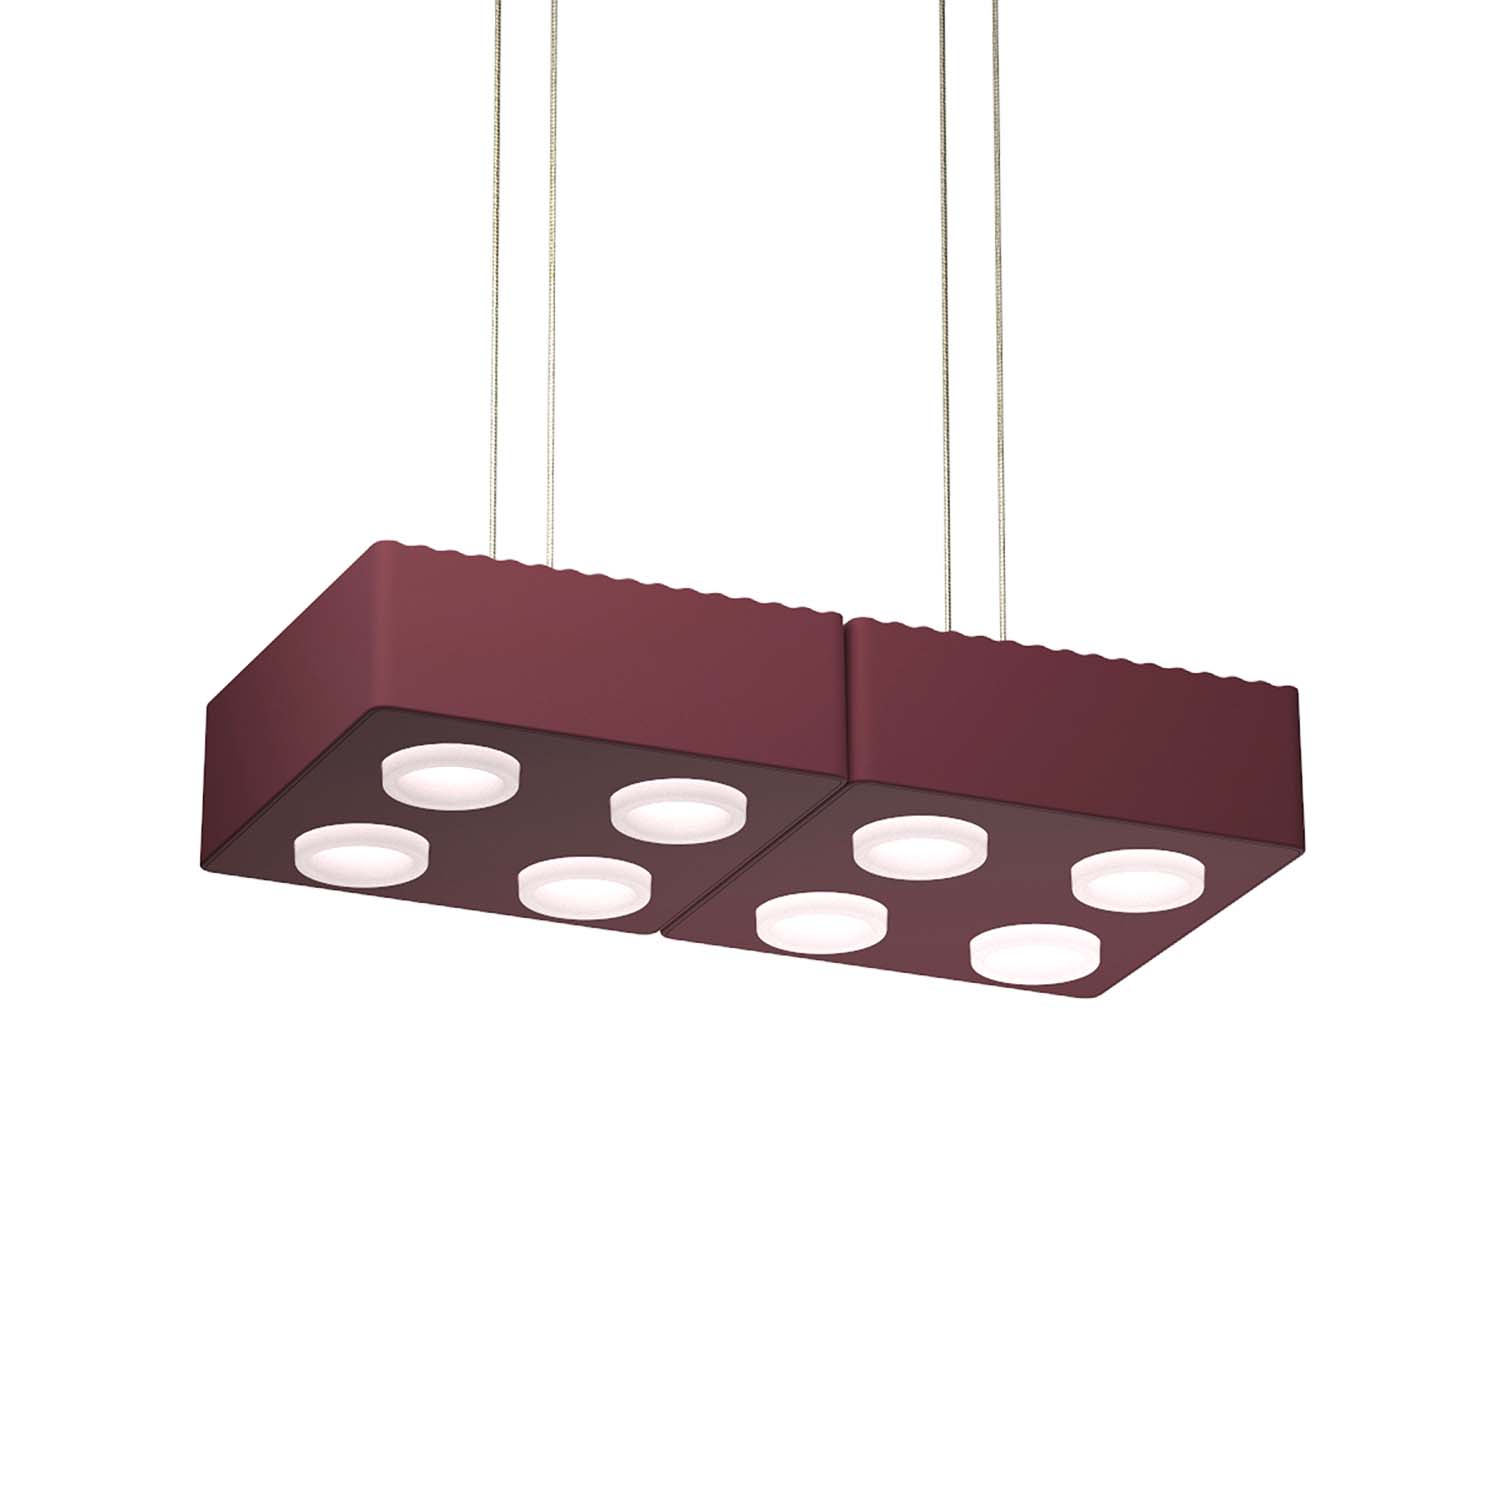 DOMINO - Pendant lamp in the shape of a lego or domino